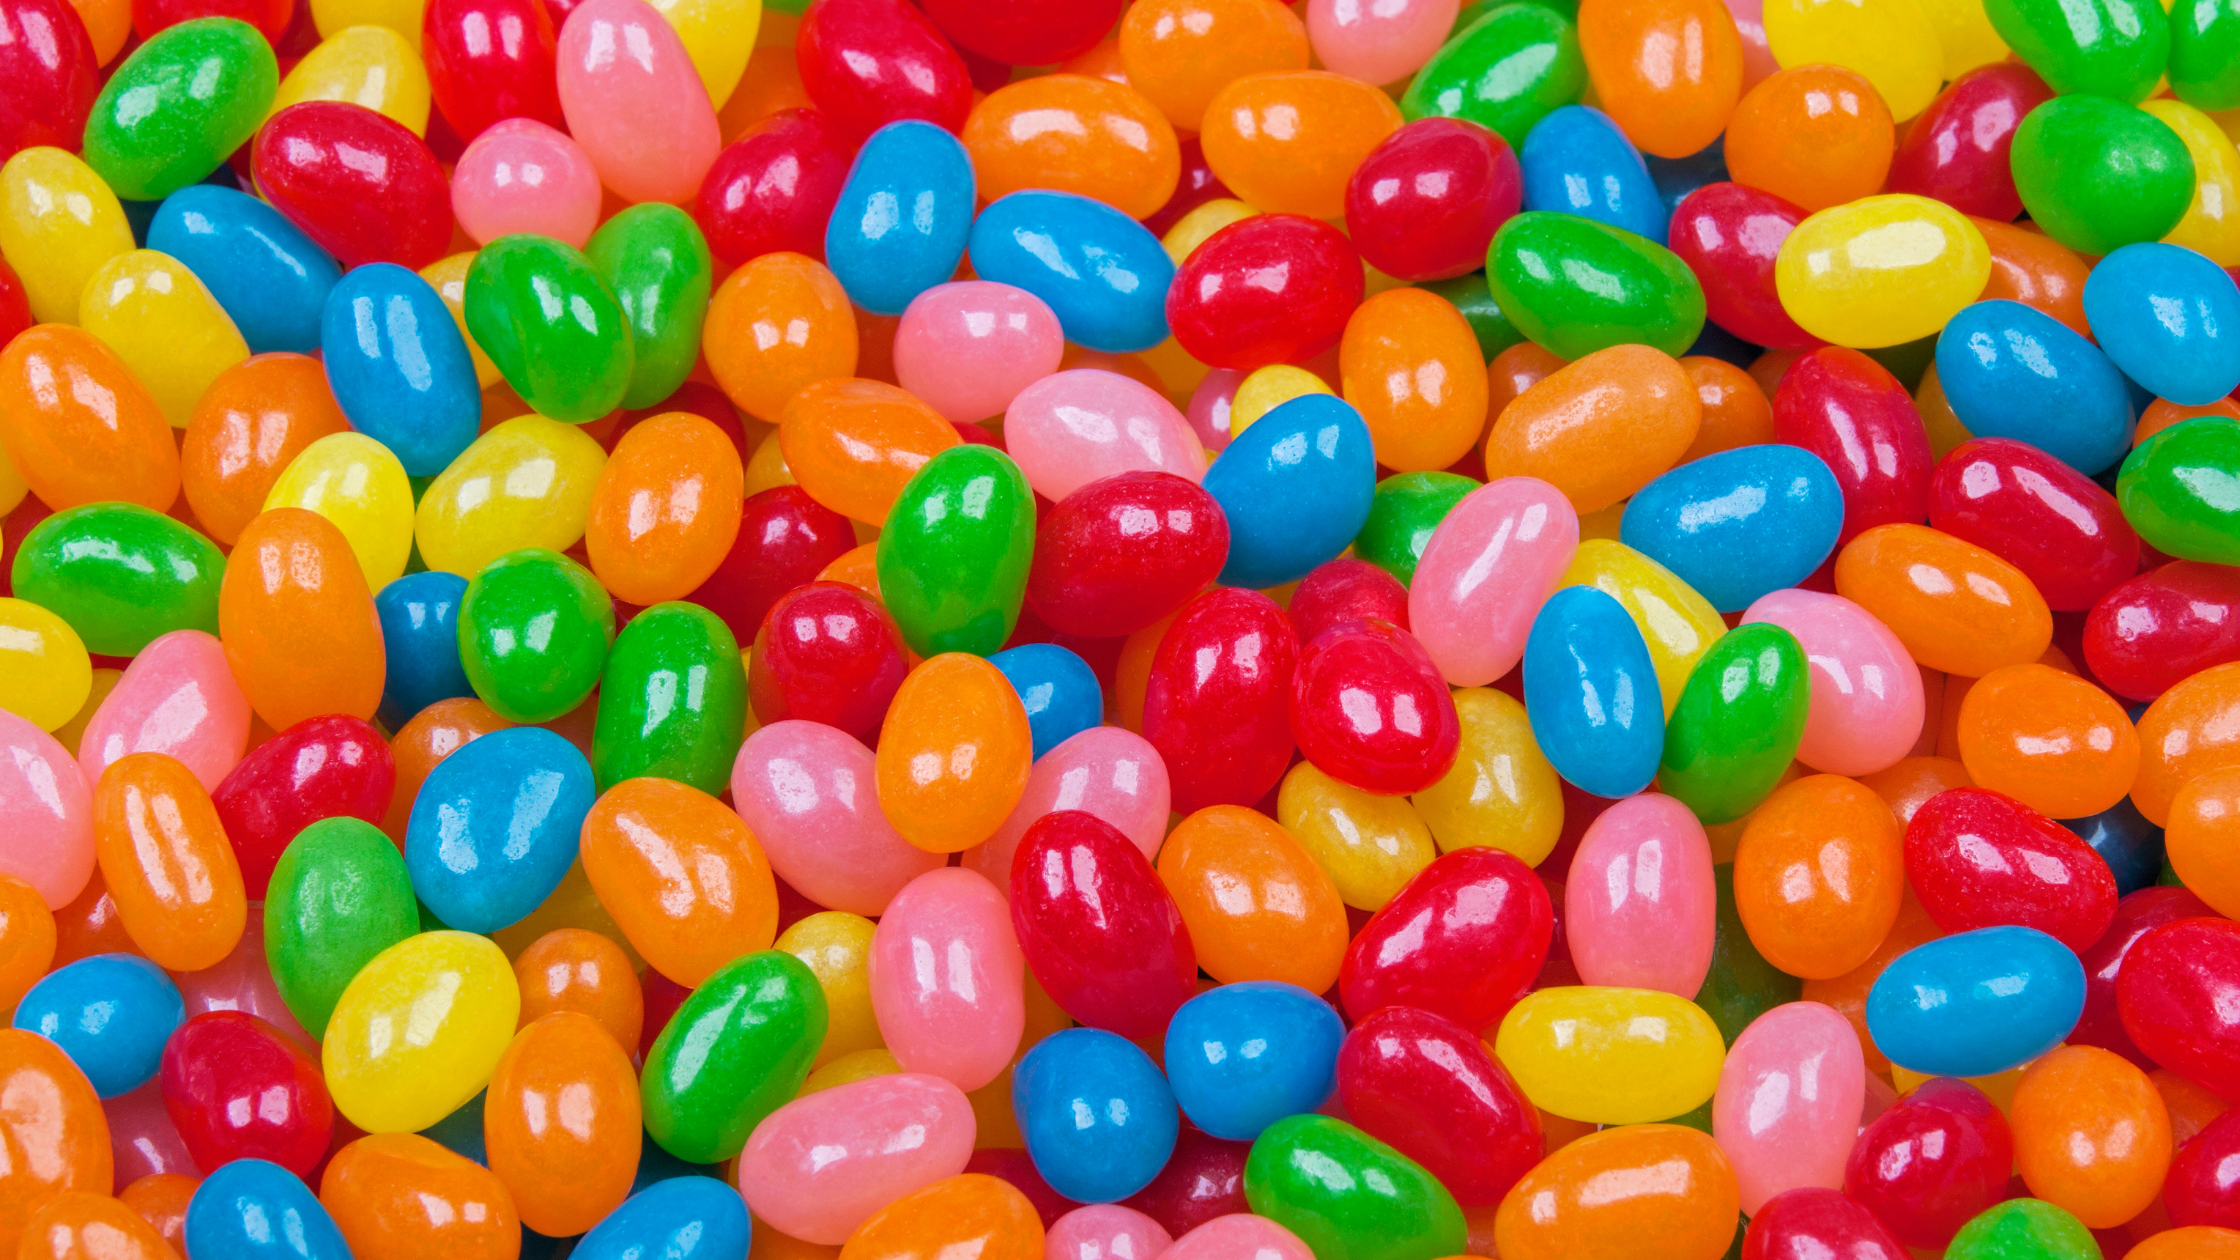 Ferrara Acquires Jelly Belly in Major Candy Industry Move